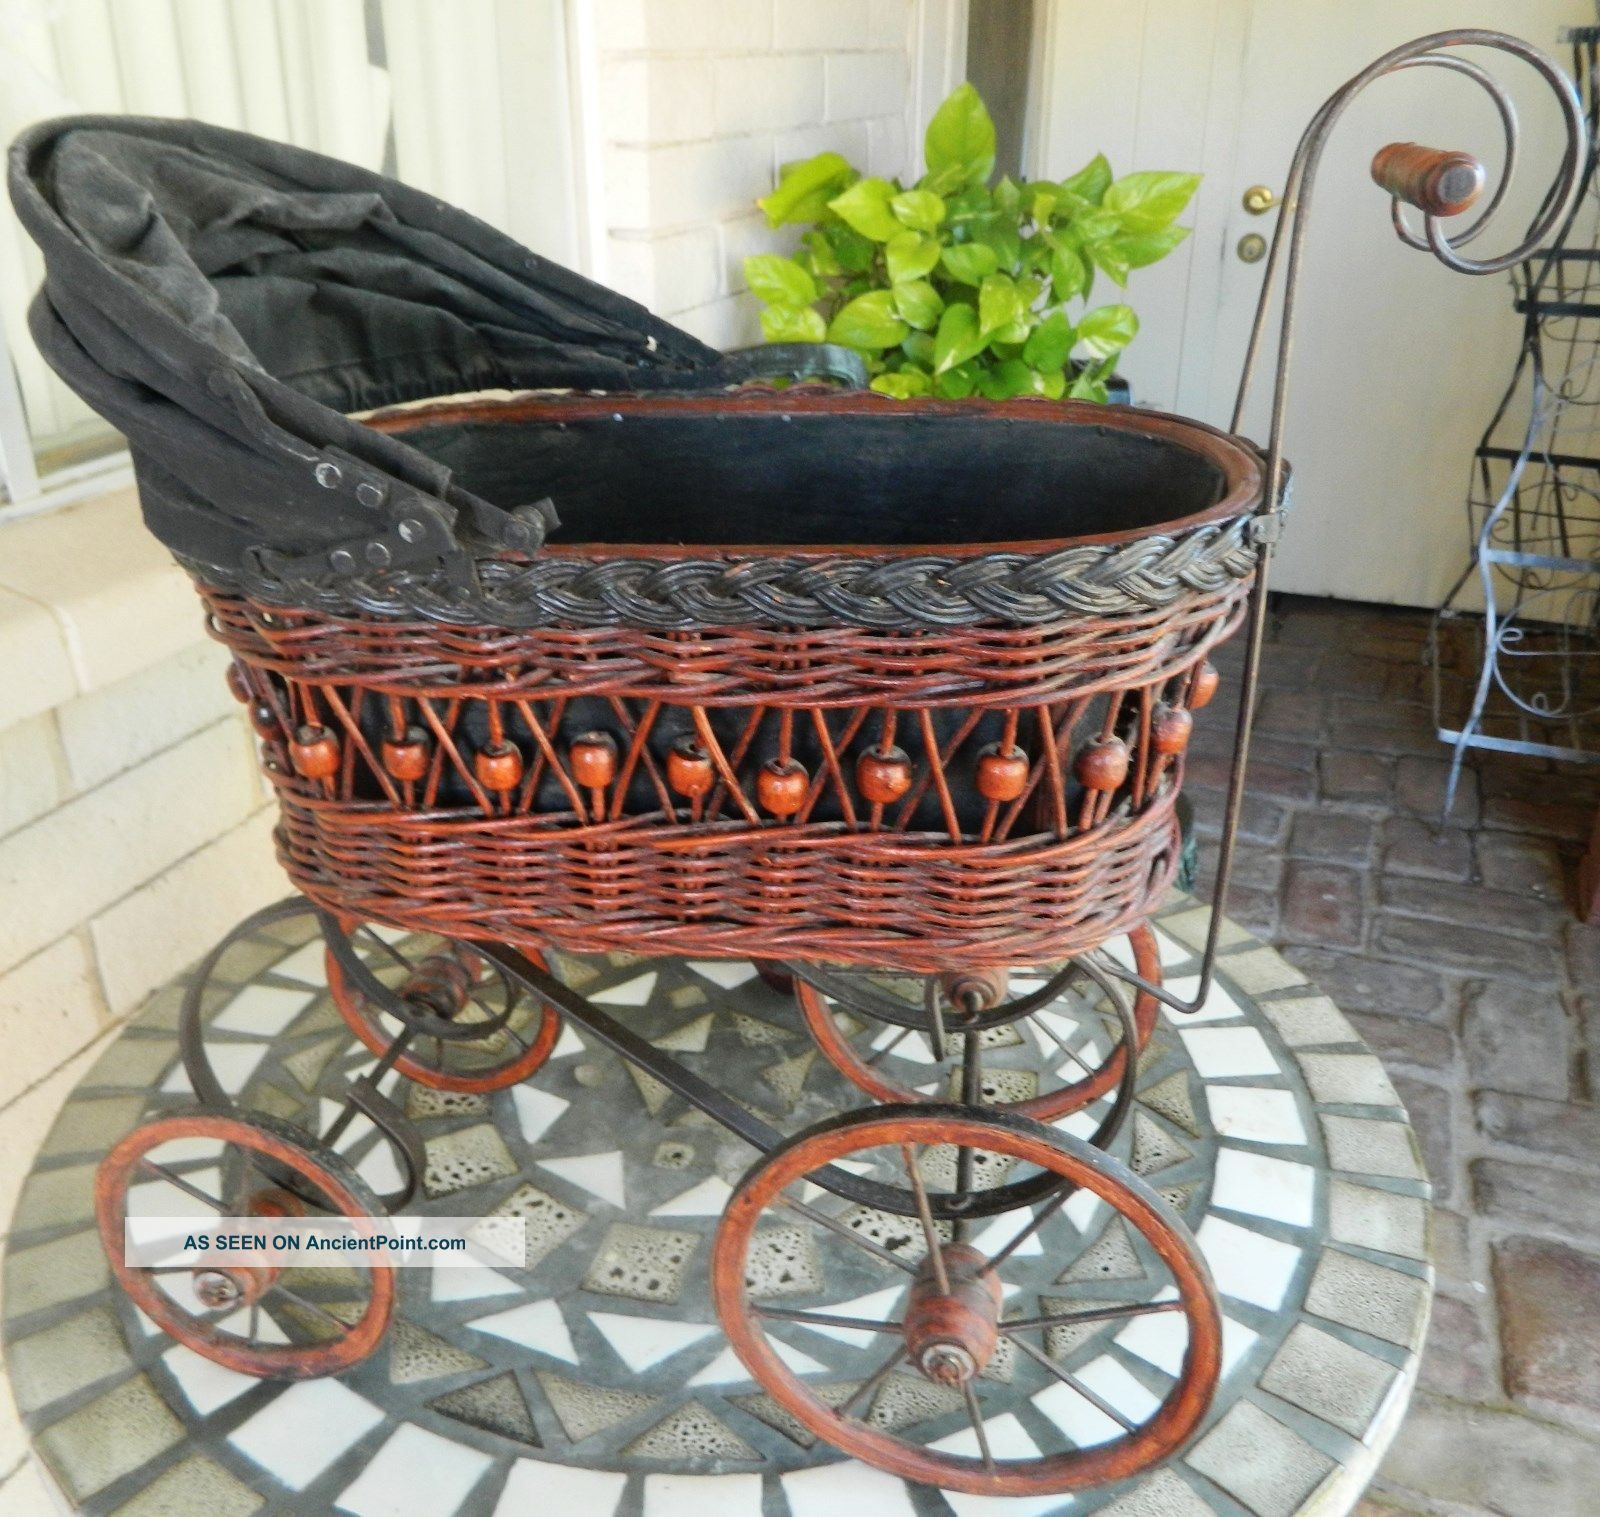 Repo Victorian/antique Style Babybuggy/pram/carriage Wood/wicker/canvas/metal Baby Carriages & Buggies photo